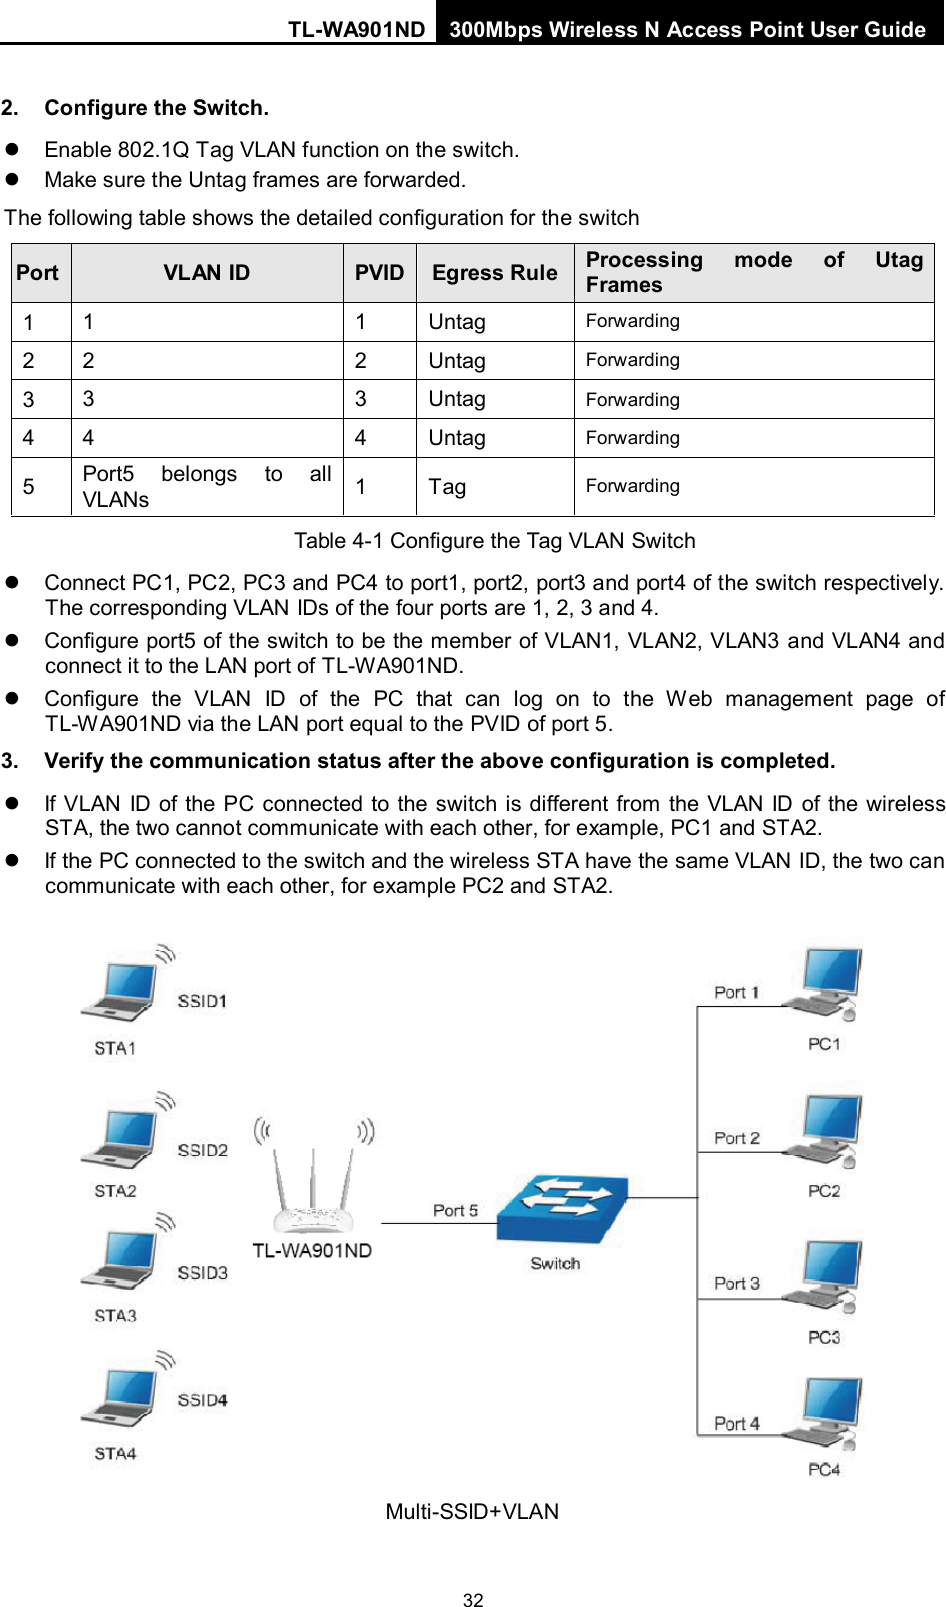 TL-WA901ND 300Mbps Wireless N Access Point User Guide  32 2. Configure the Switch.  Enable 802.1Q Tag VLAN function on the switch.  Make sure the Untag frames are forwarded. The following table shows the detailed configuration for the switch   Port VLAN ID PVID Egress Rule Processing mode of Utag Frames 1  1  1  Untag Forwarding 2  2  2  Untag Forwarding 3  3  3  Untag Forwarding   4  4  4  Untag Forwarding 5  Port5 belongs to all VLANs 1  Tag Forwarding Table 4-1 Configure the Tag VLAN Switch  Connect PC1, PC2, PC3 and PC4 to port1, port2, port3 and port4 of the switch respectively. The corresponding VLAN IDs of the four ports are 1, 2, 3 and 4.  Configure port5 of the switch to be the member of VLAN1, VLAN2, VLAN3 and VLAN4 and connect it to the LAN port of TL-WA901ND.  Configure the VLAN ID of the PC that can log on to the Web management page of TL-WA901ND via the LAN port equal to the PVID of port 5. 3. Verify the communication status after the above configuration is completed.  If VLAN ID of the PC connected to the switch is different from the VLAN ID of the wireless STA, the two cannot communicate with each other, for example, PC1 and STA2.  If the PC connected to the switch and the wireless STA have the same VLAN ID, the two can communicate with each other, for example PC2 and STA2.  Multi-SSID+VLAN 